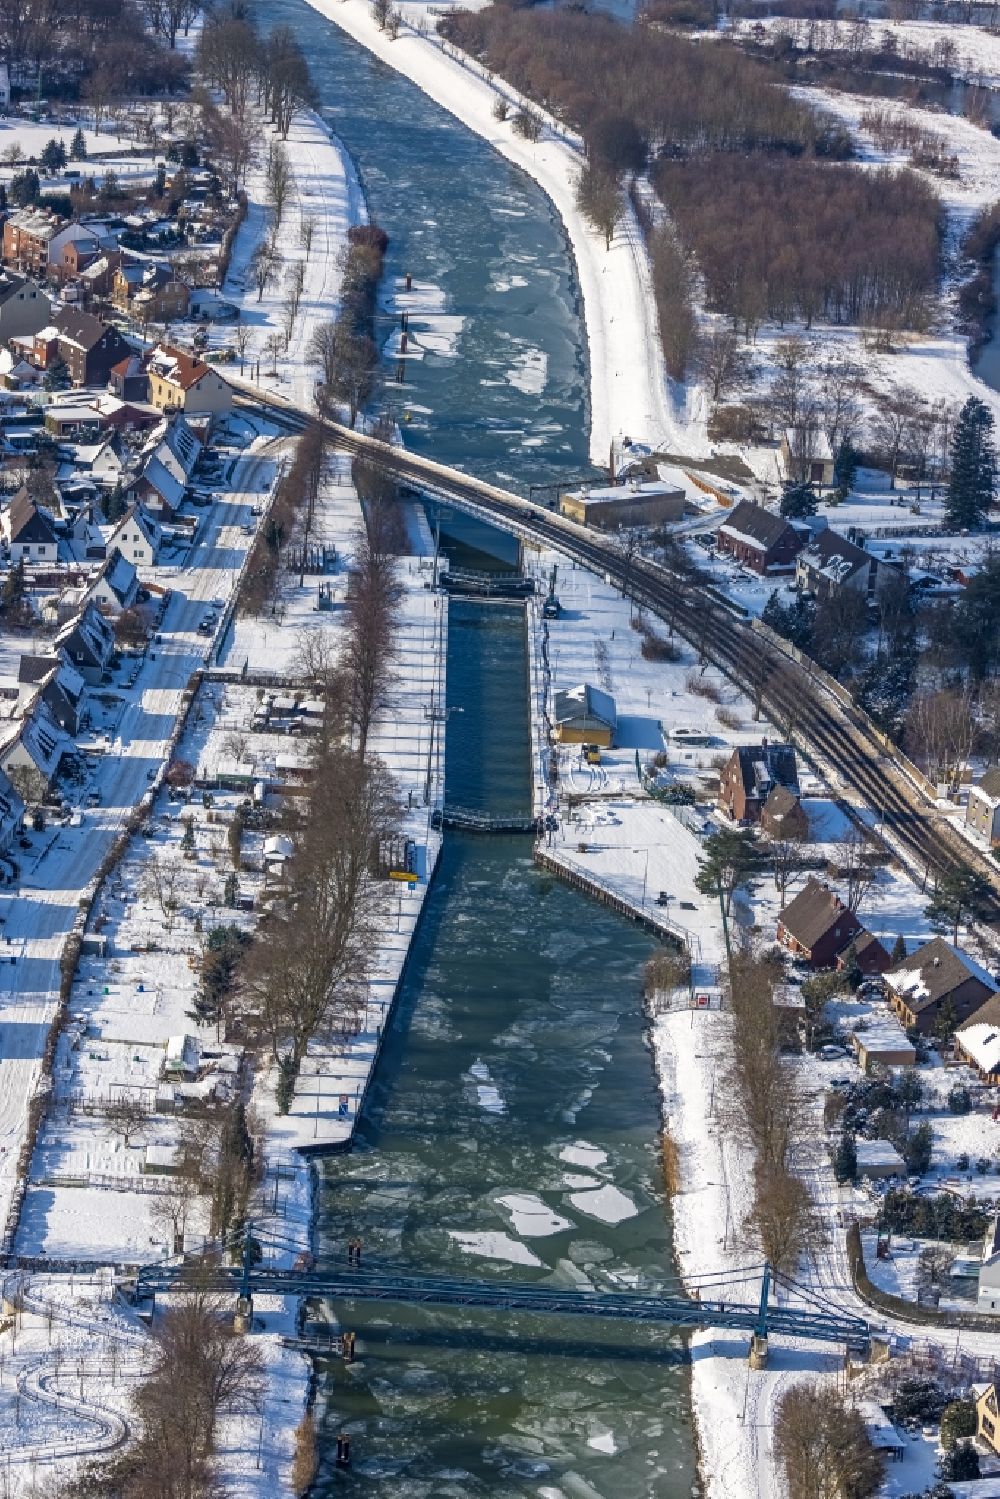 Hamm from the bird's eye view: Wintry snowy barrage lock system Schleuse Werries on the Datteln-Hamm Canal in Hamm in the Ruhr area in the state North Rhine-Westphalia, Germany